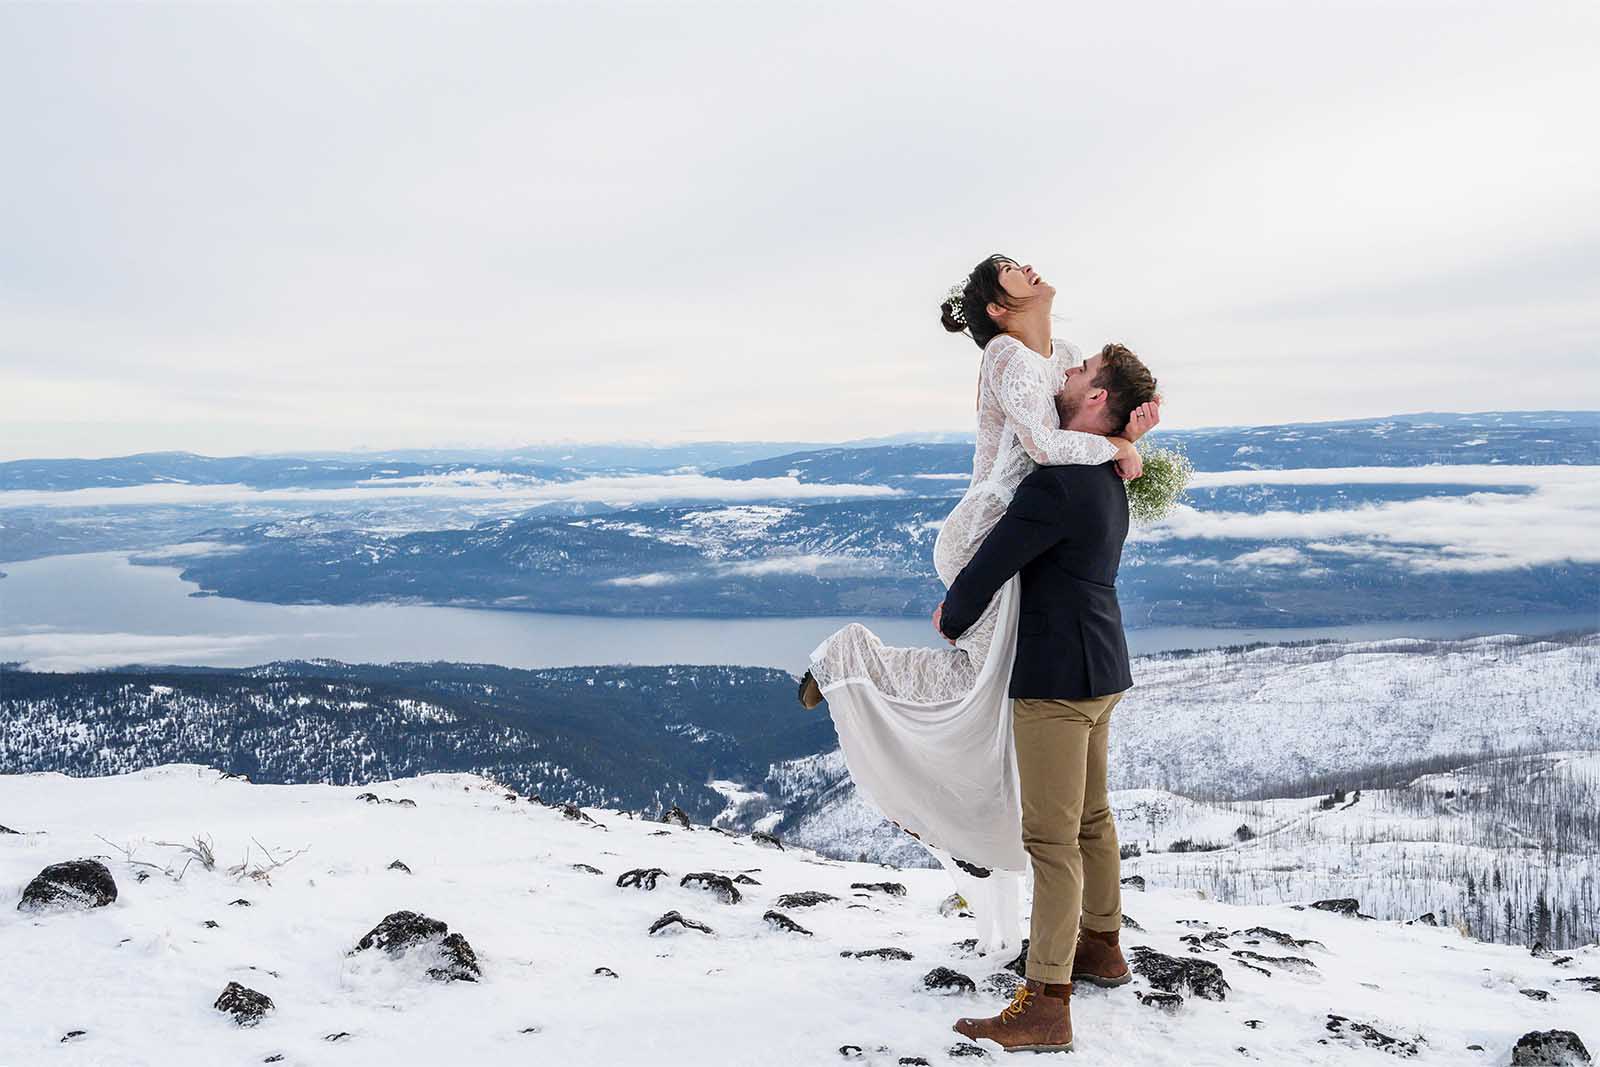 Groom, lifting the bride in the air. Winter wedding celebration in the snowy mountains. 